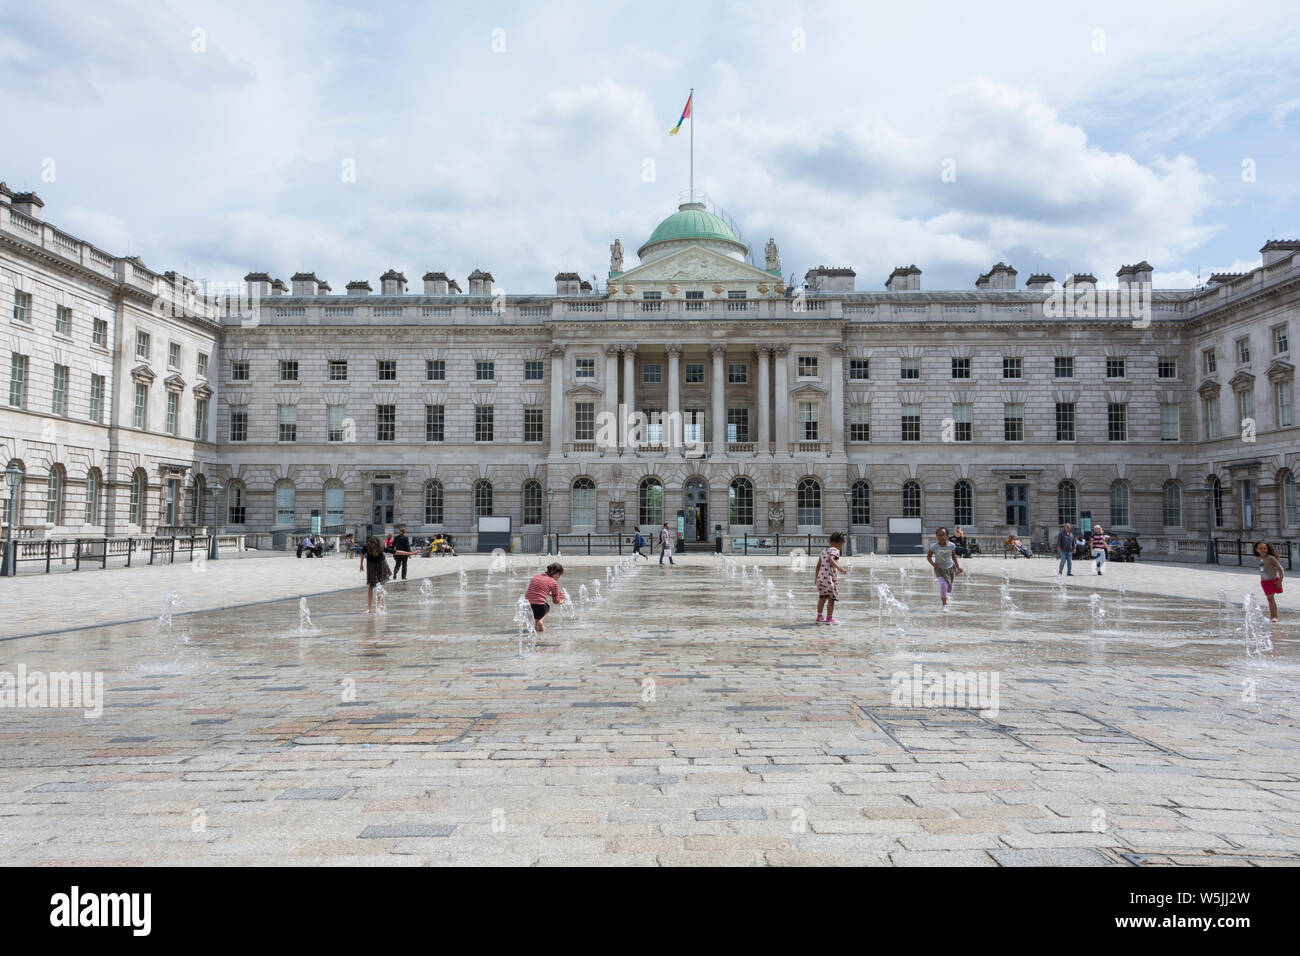 Children playing in the water fountains in the  neoclassical Somerset House Courtyard, London, England, UK Stock Photo